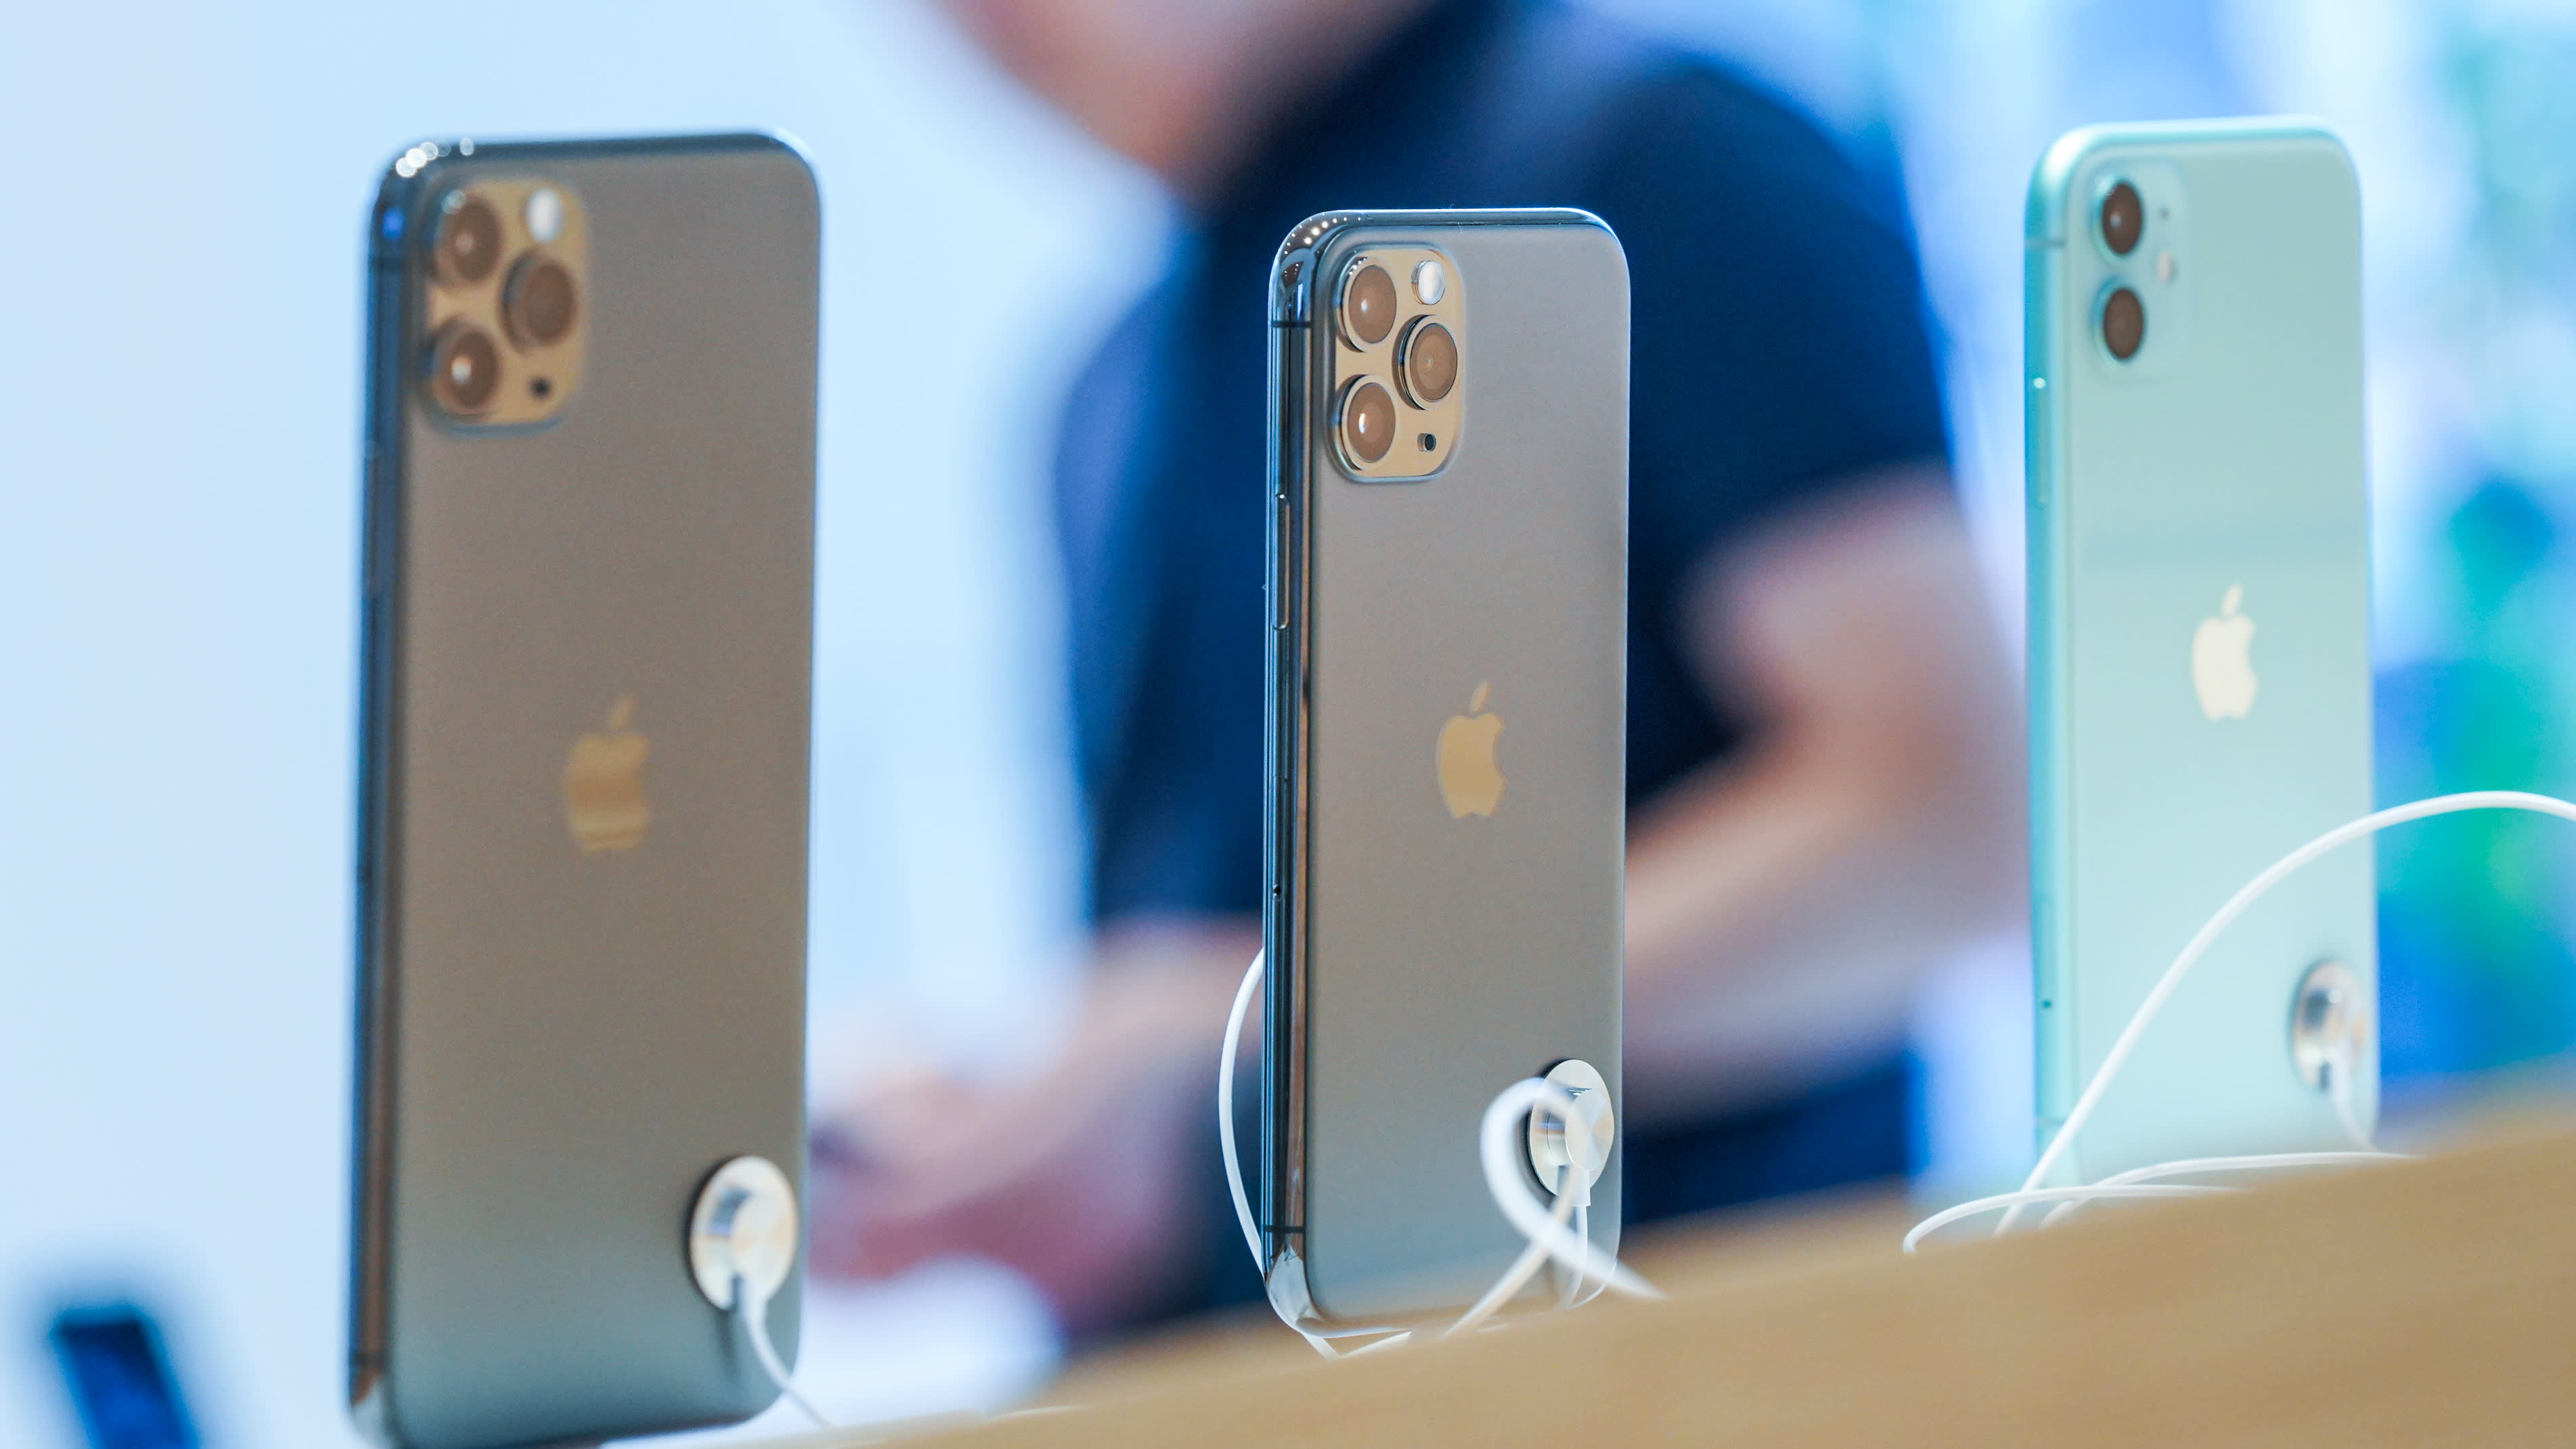 Apple sold 130,000 iPhone 11s on launch day in South Korea